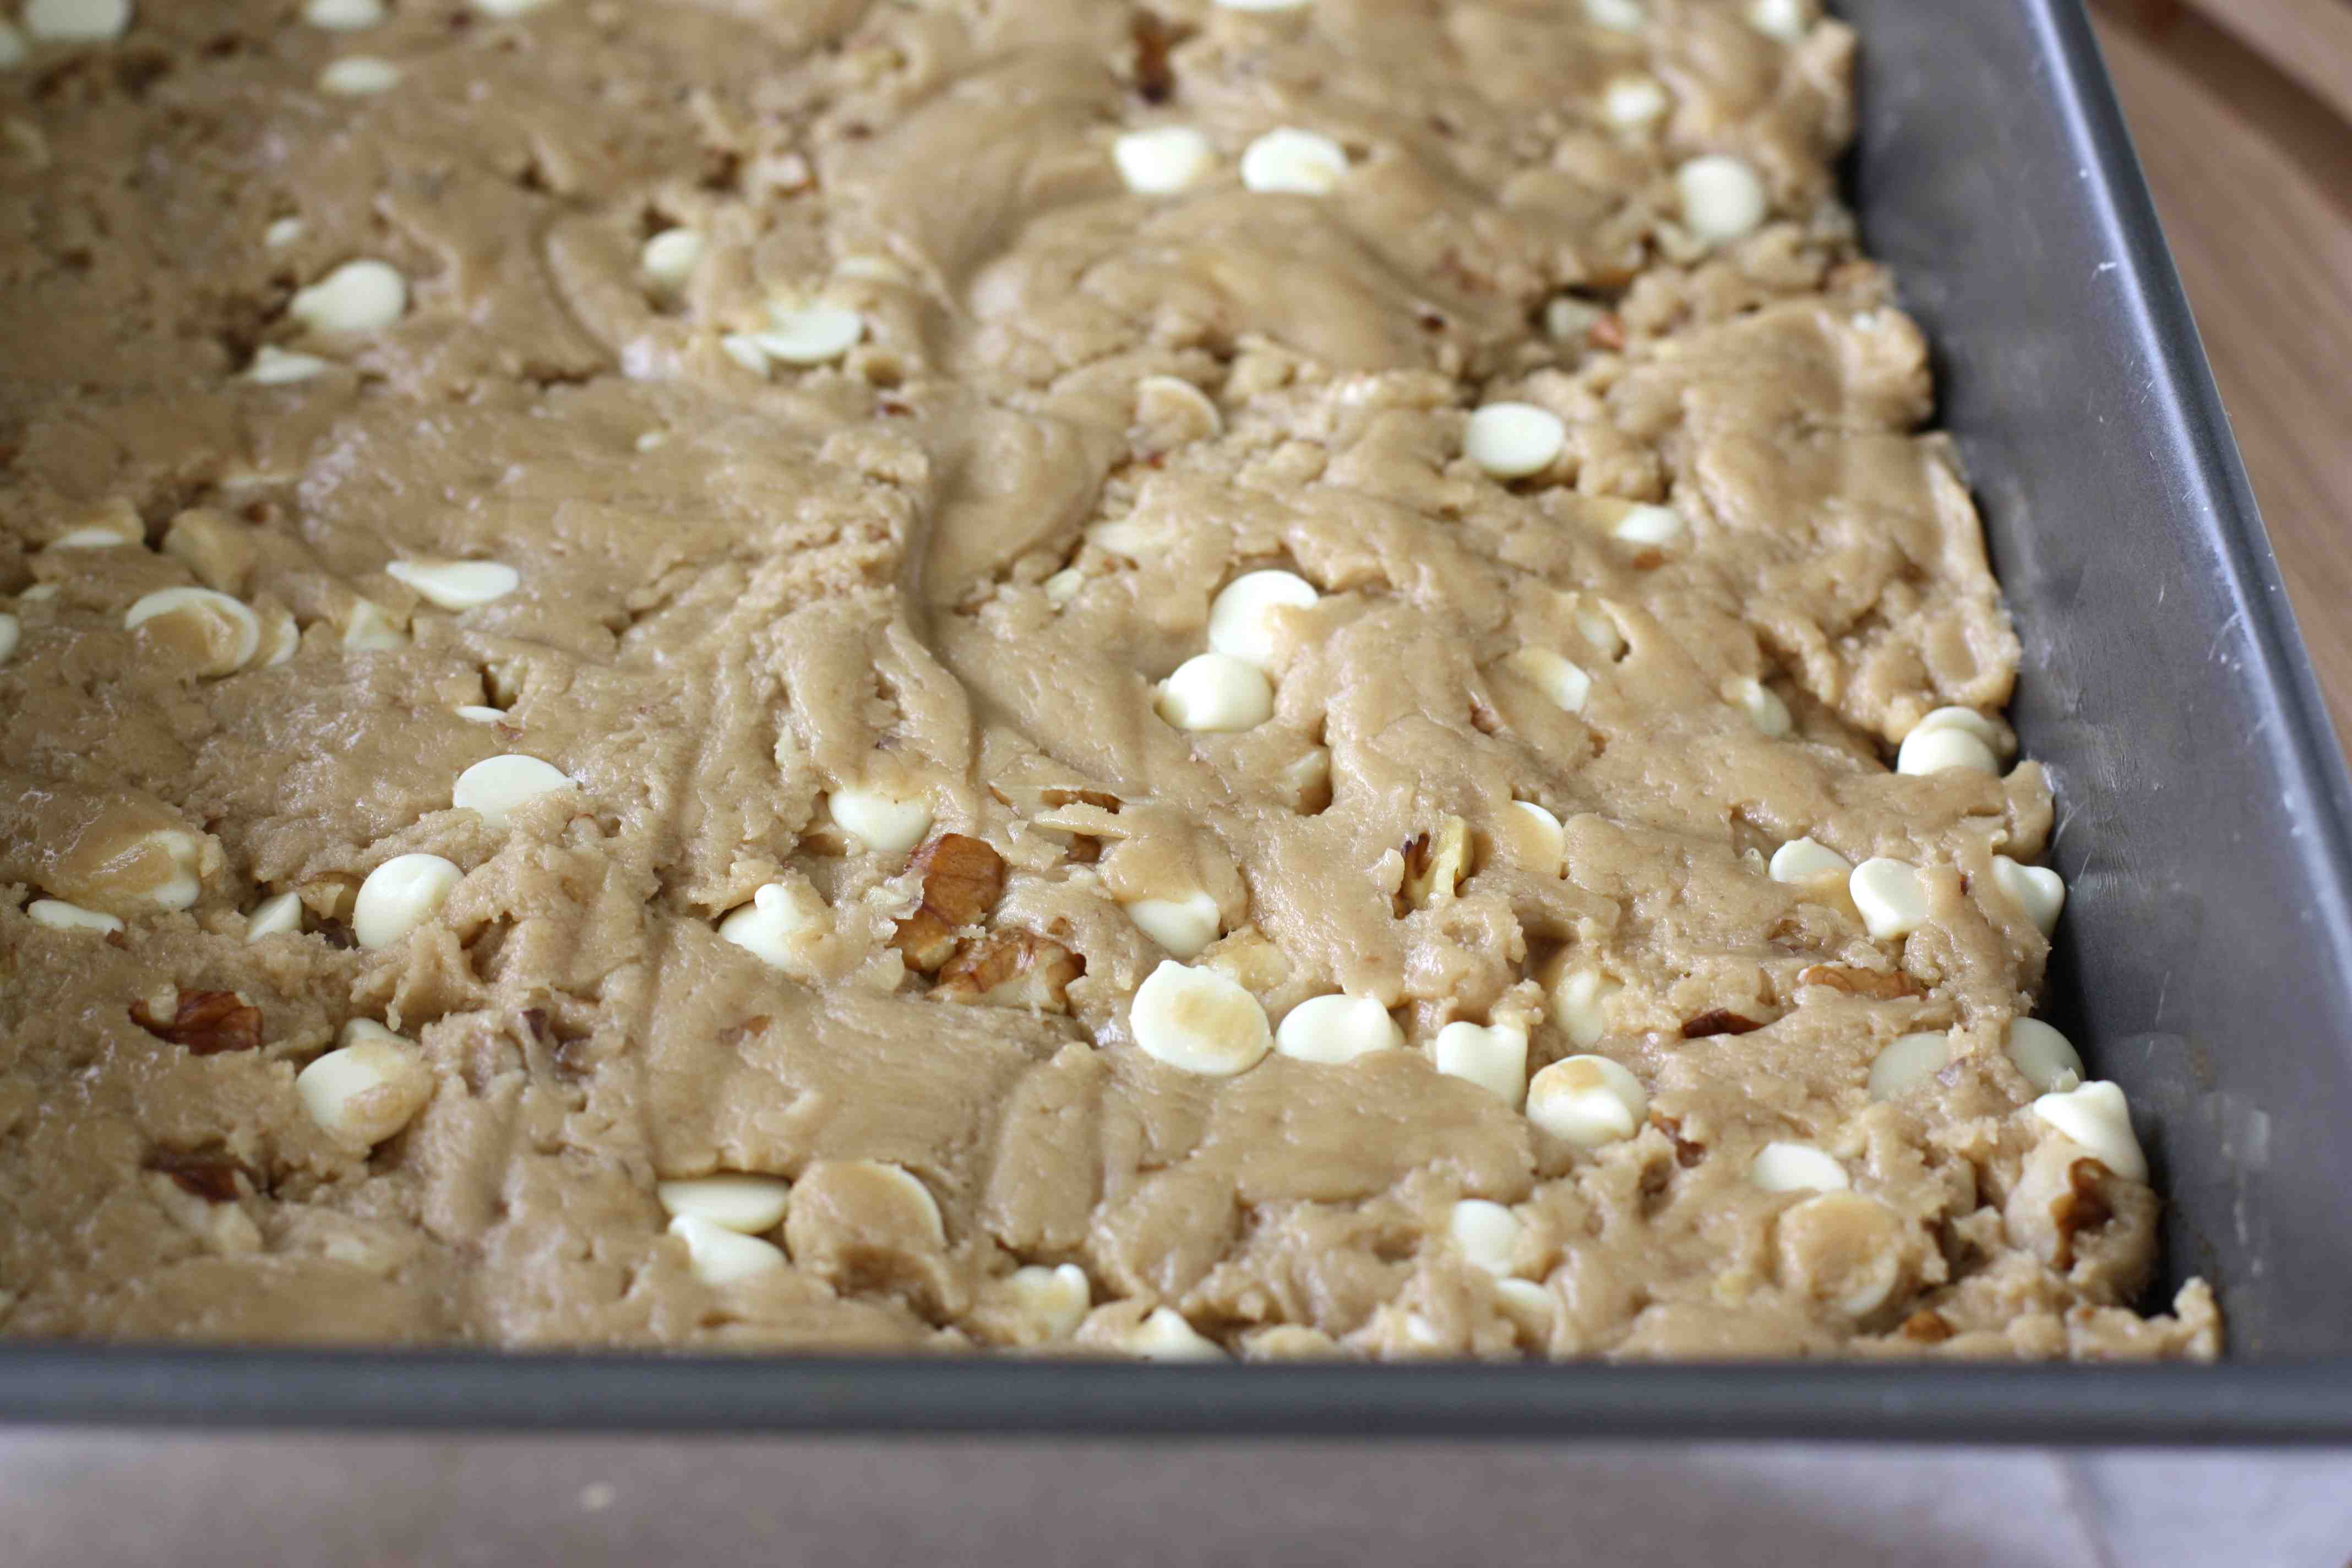 Tasty Kitchen Blog: White Chocolate Walnut Blondies with Maple Butter Sauce. Guest post by Dara Michalski of Cookin' Canuck, recipe submitted by TK member Brandie of The Country Cook.